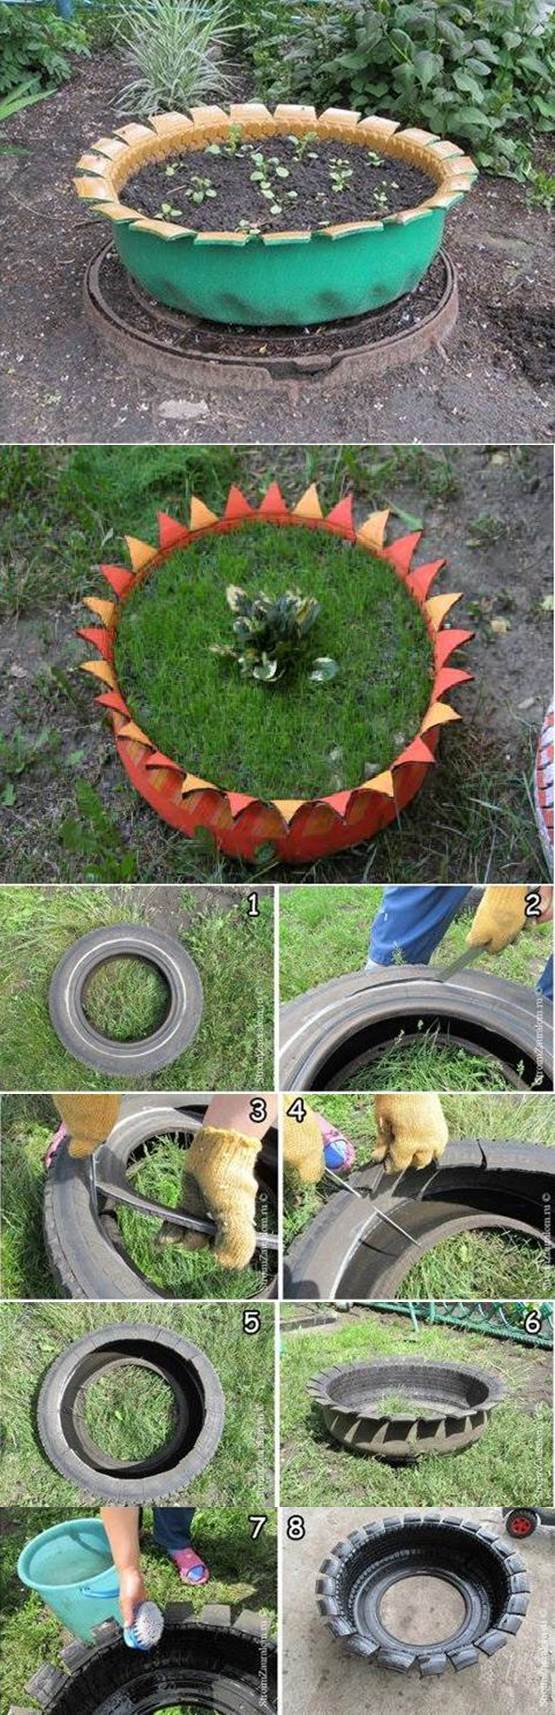 Old Tire Turned into Plant Pot 2